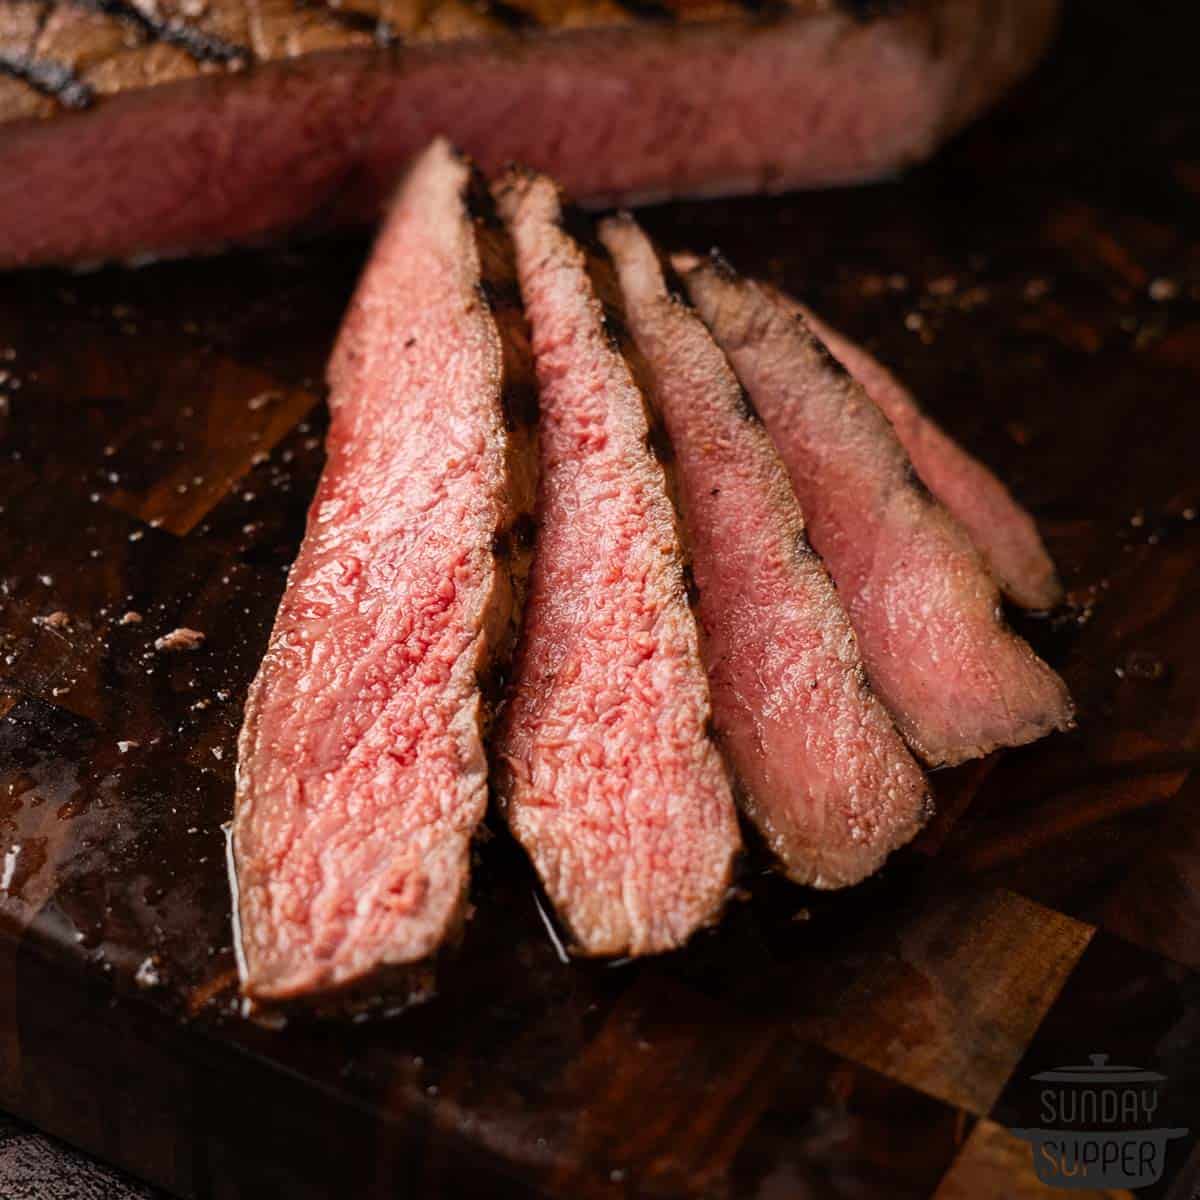 slices of london broil on a cutting board up close